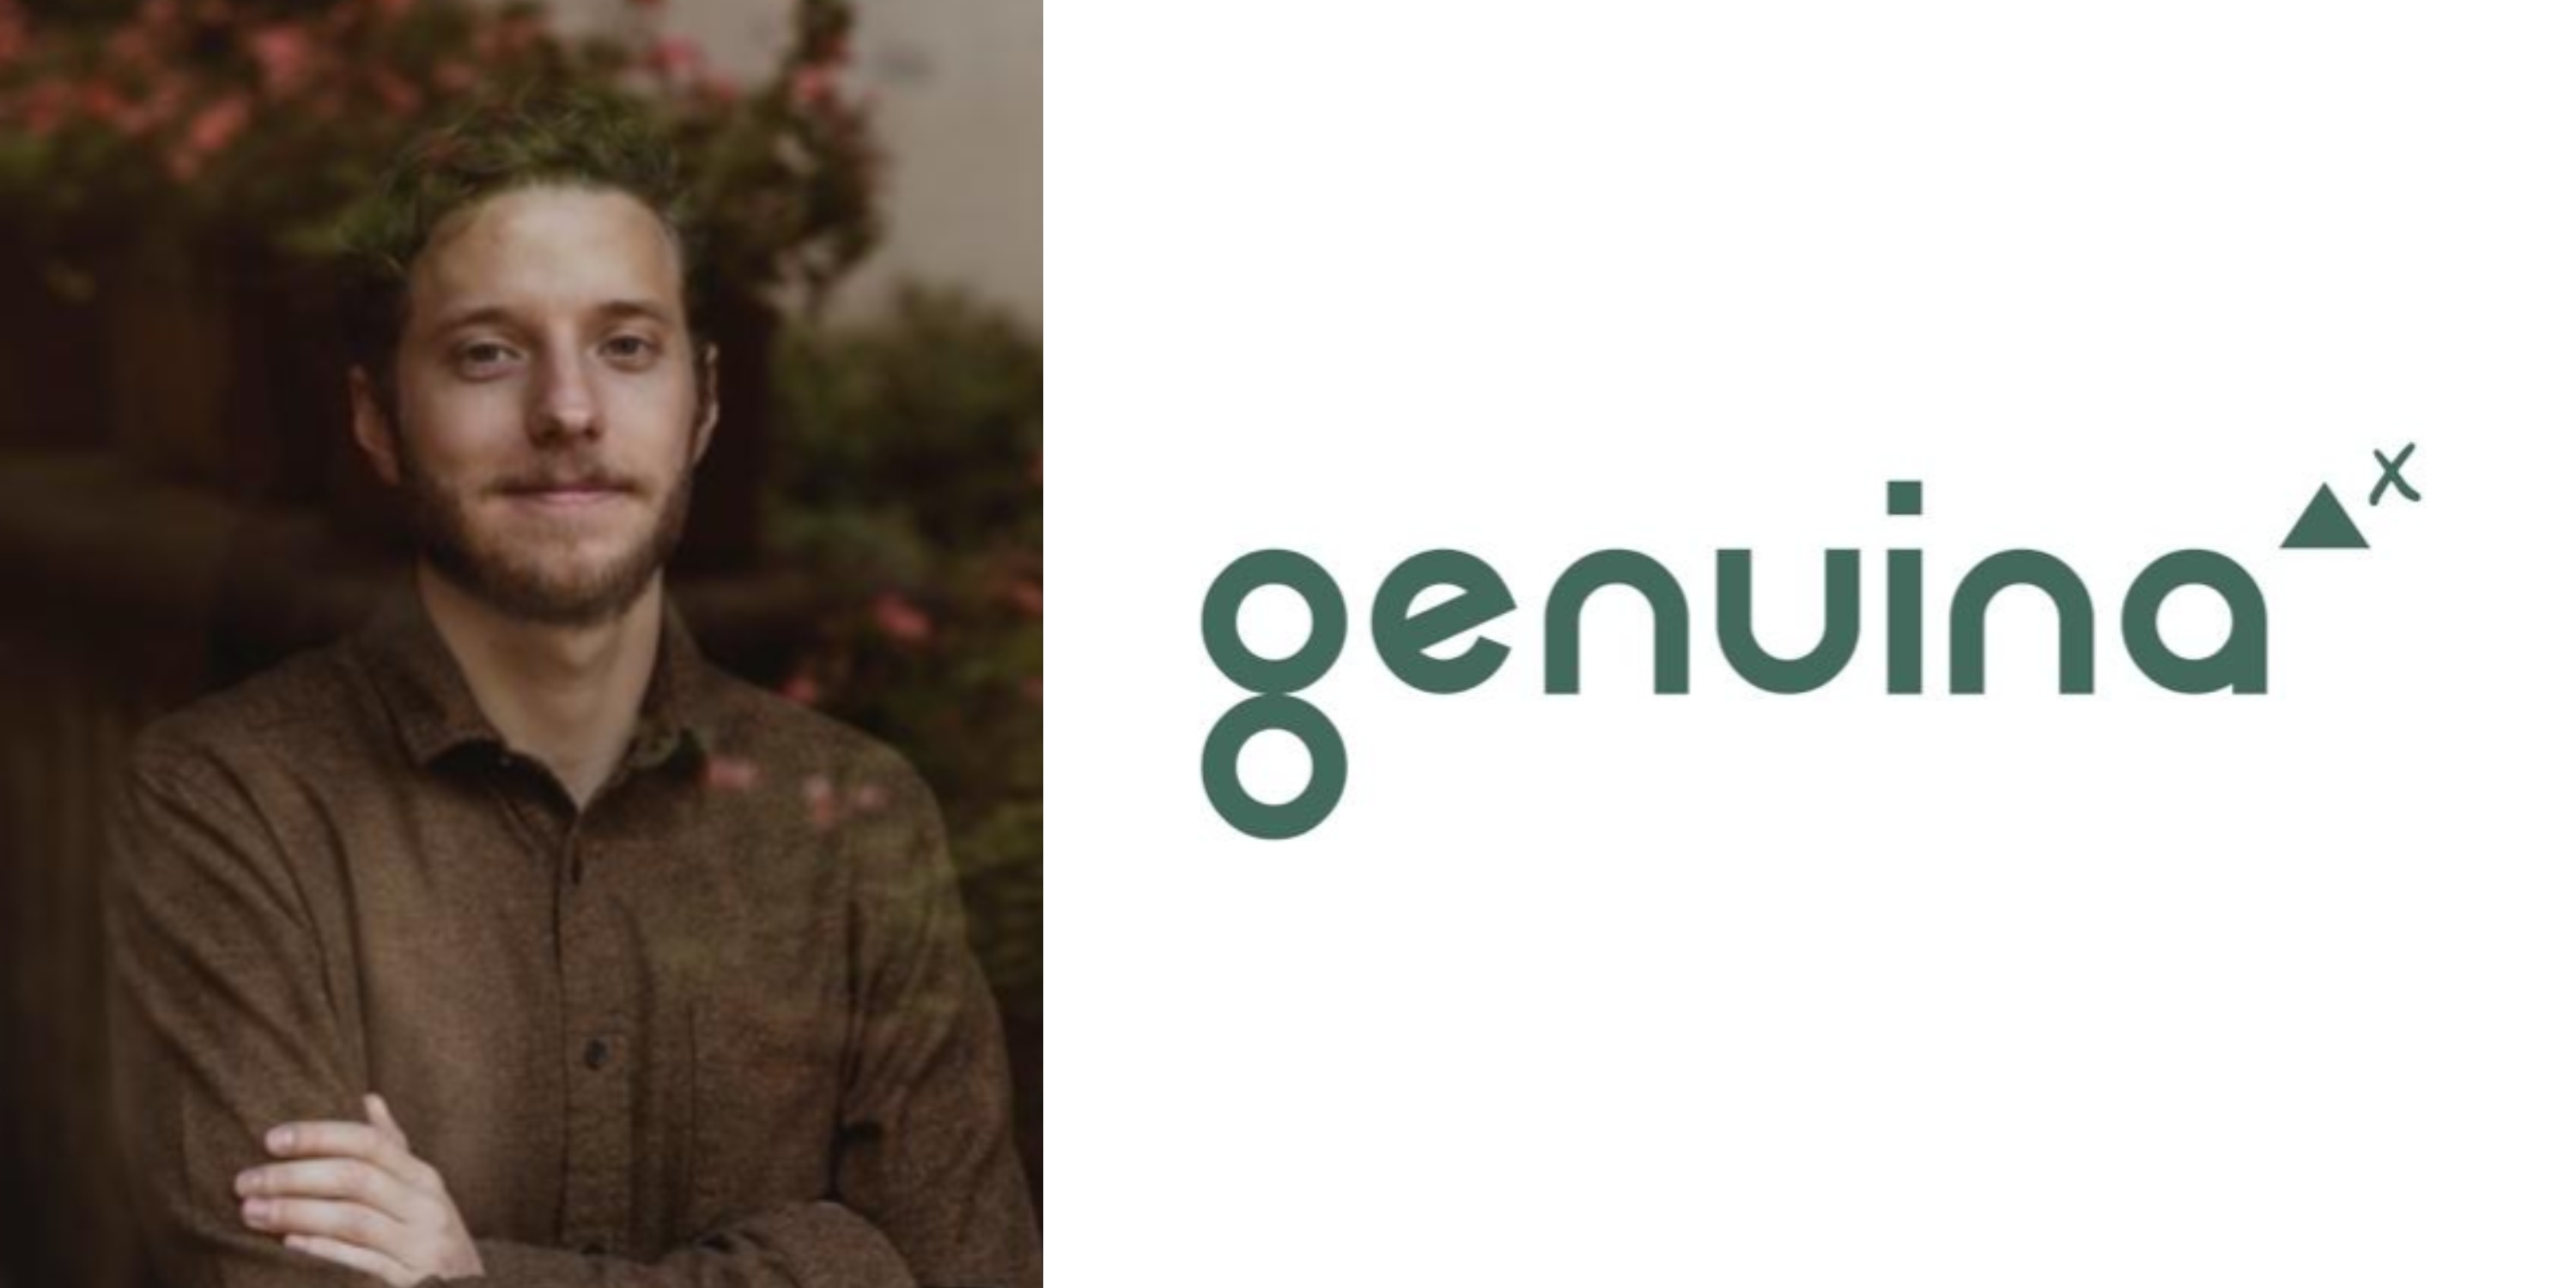 A headshot of co-founder David Roemer González and the Genuina Media logo.